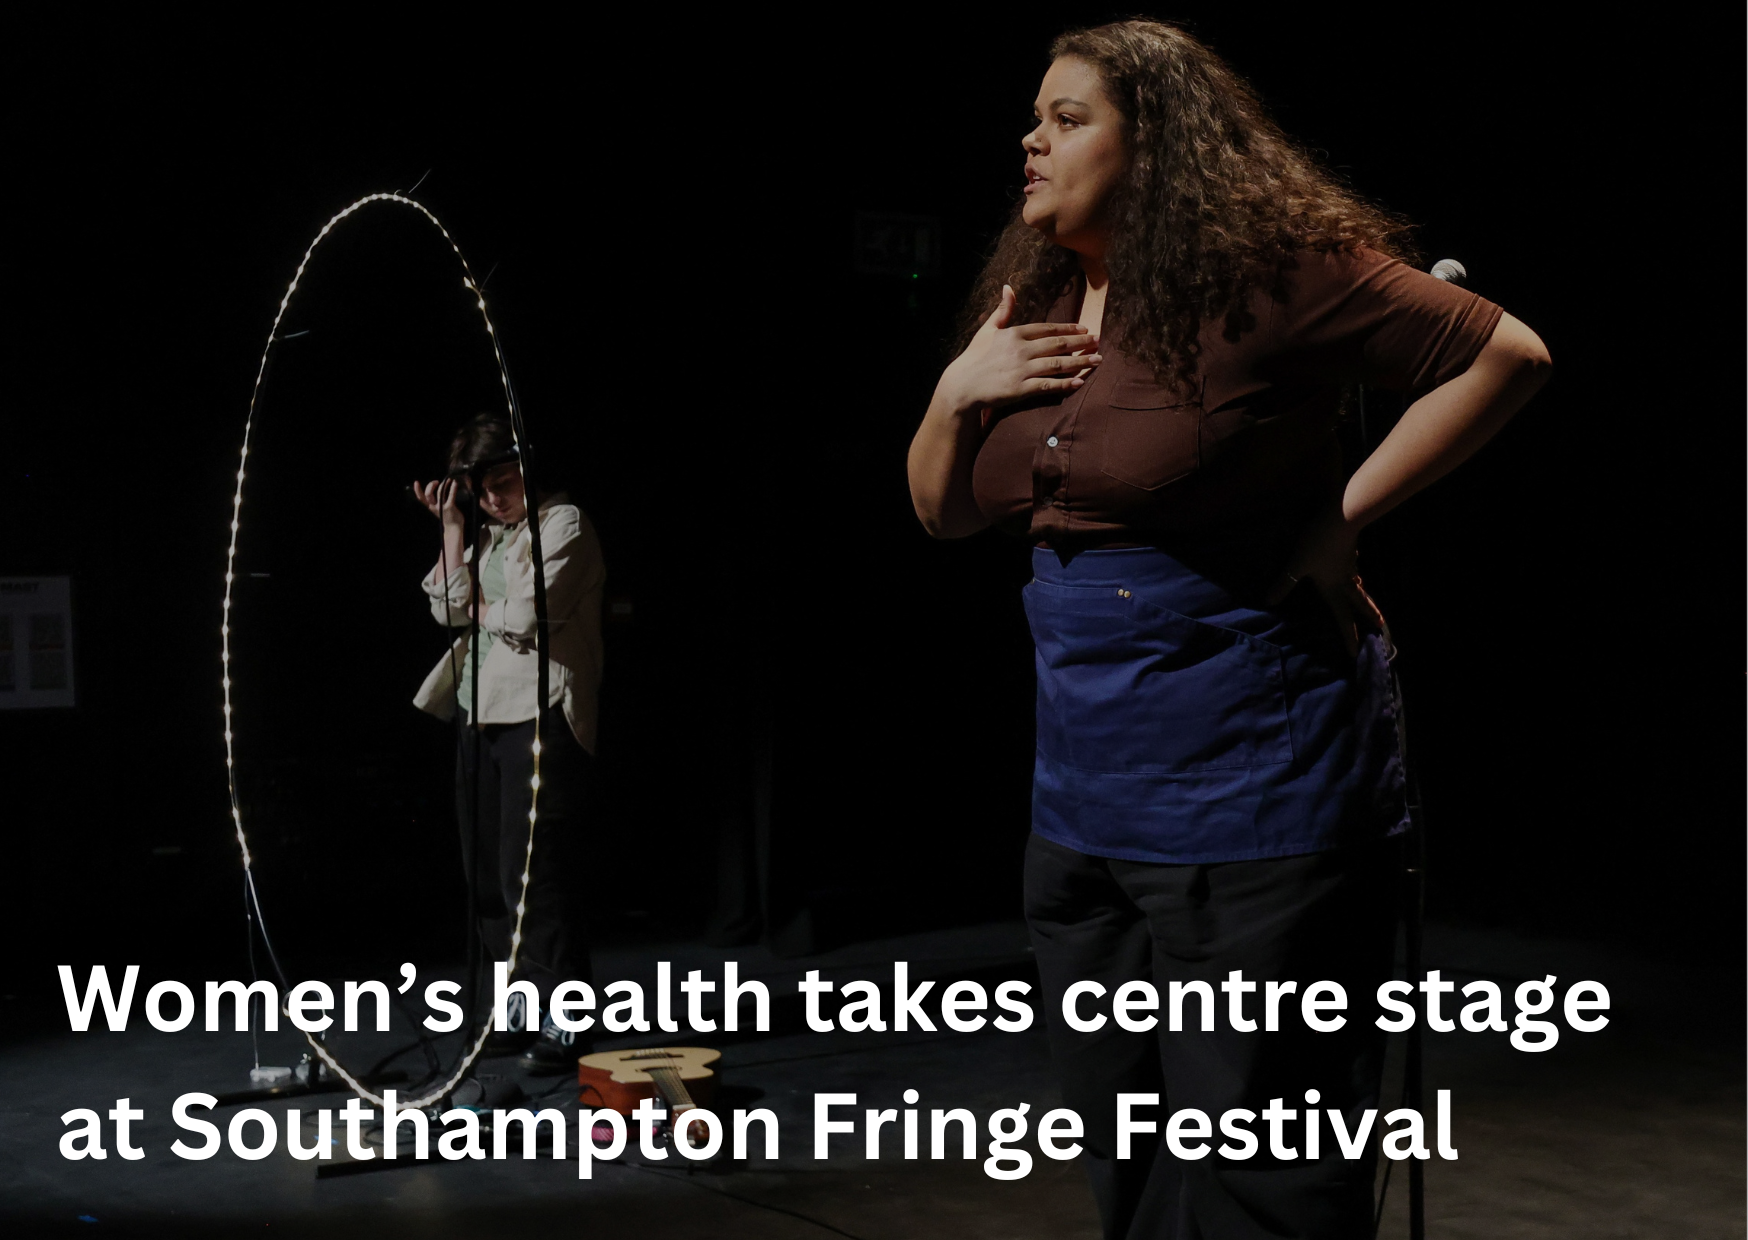 Women's Health takes centre stage at SO:Fringe